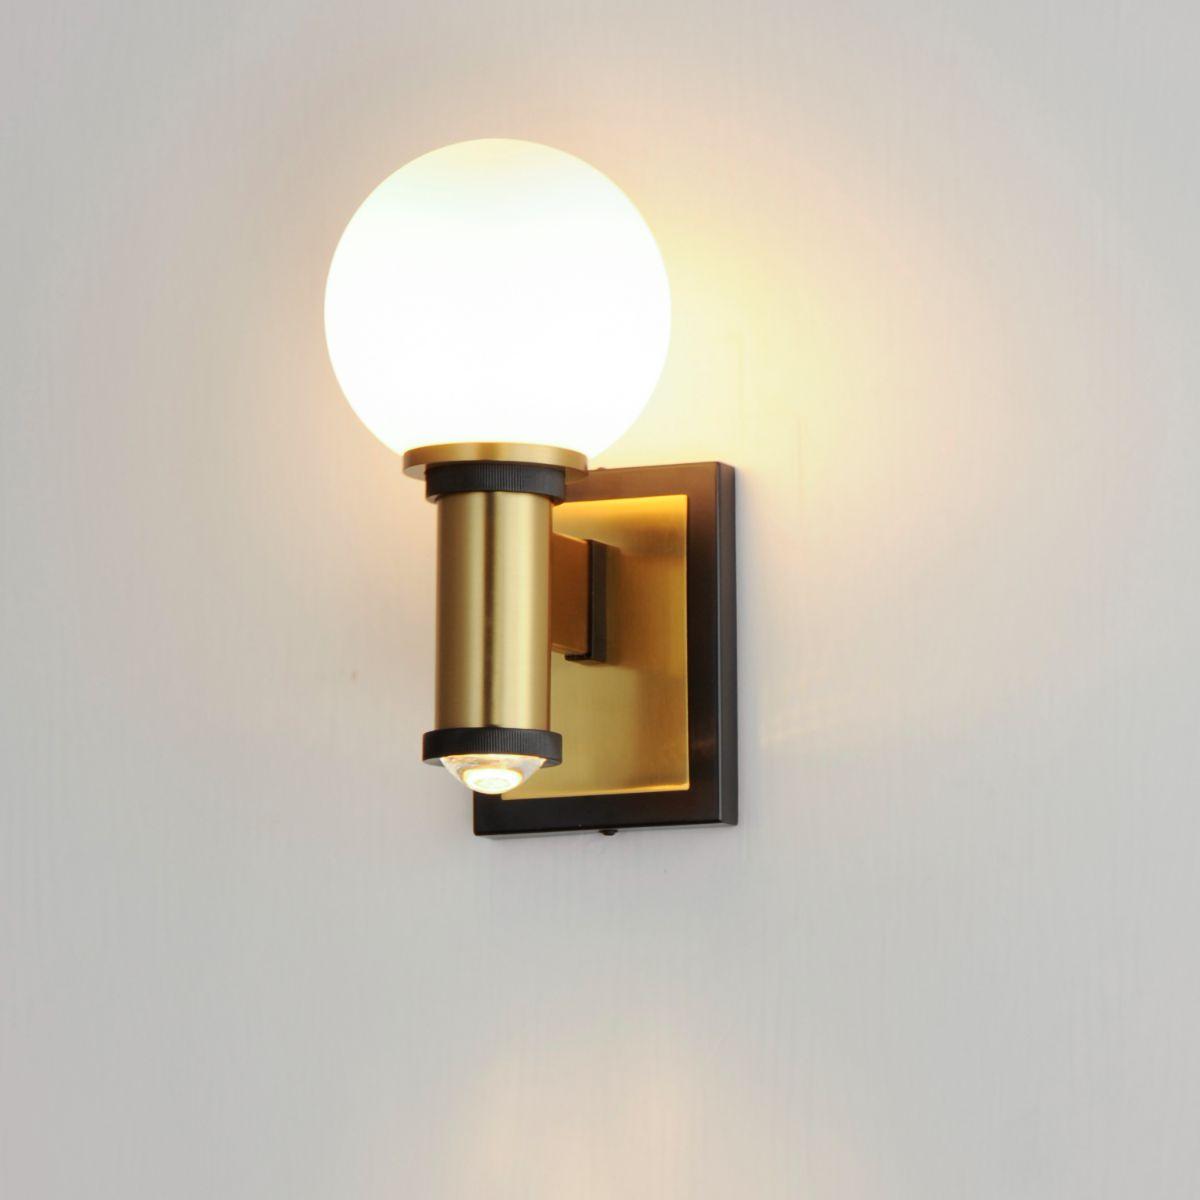 San Simeon 12 in. 2 Lights LED Armed Sconce Black & Antique Brass Finish